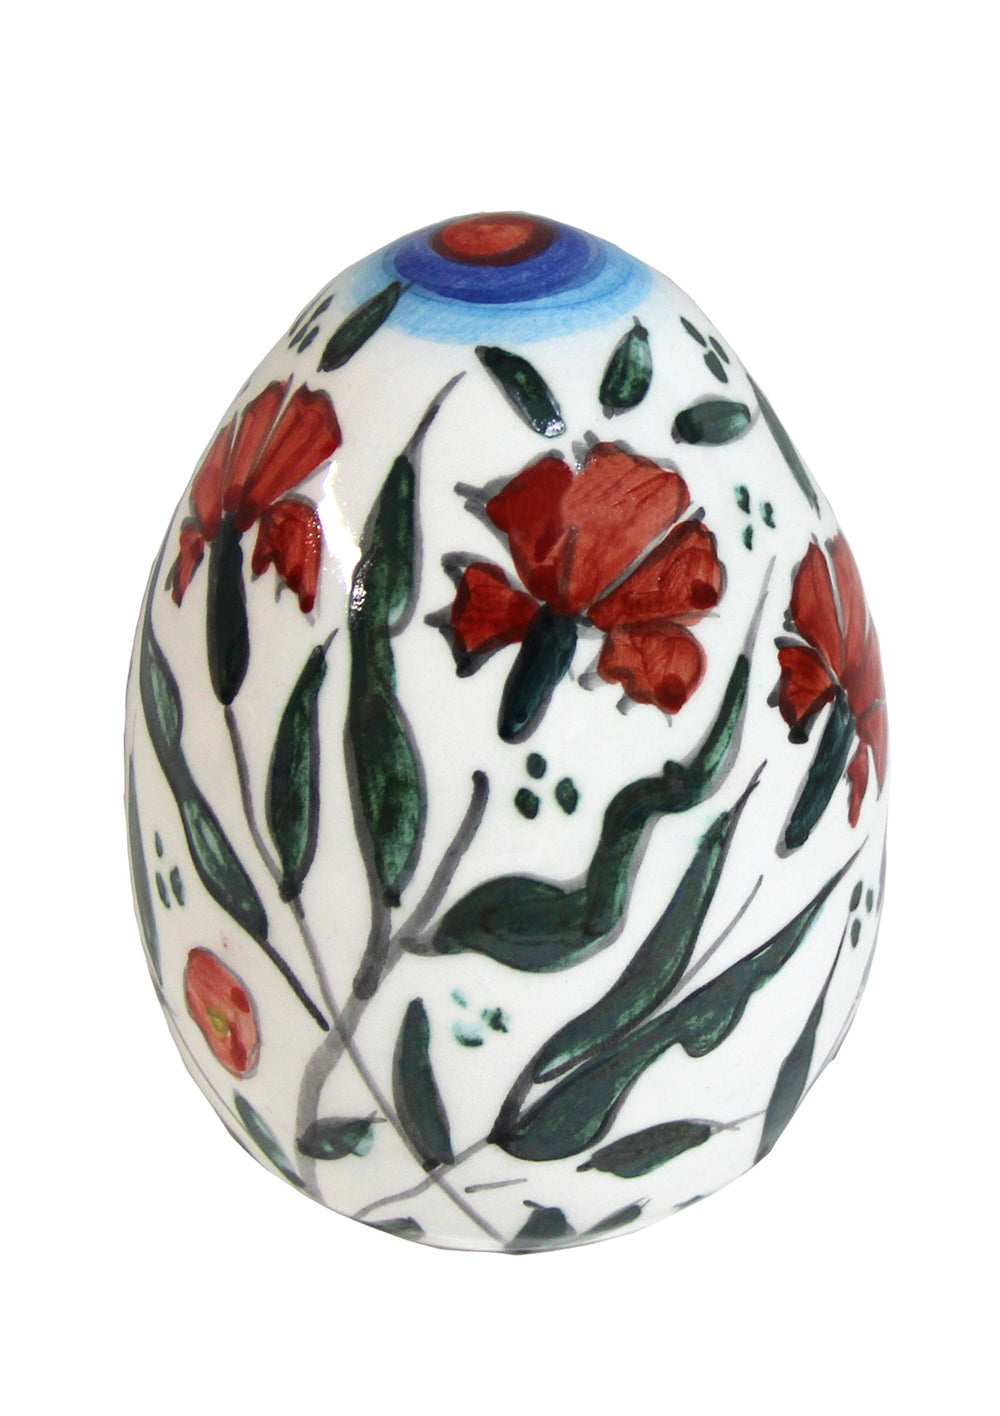 Ceramic egg with flowers (carnations)